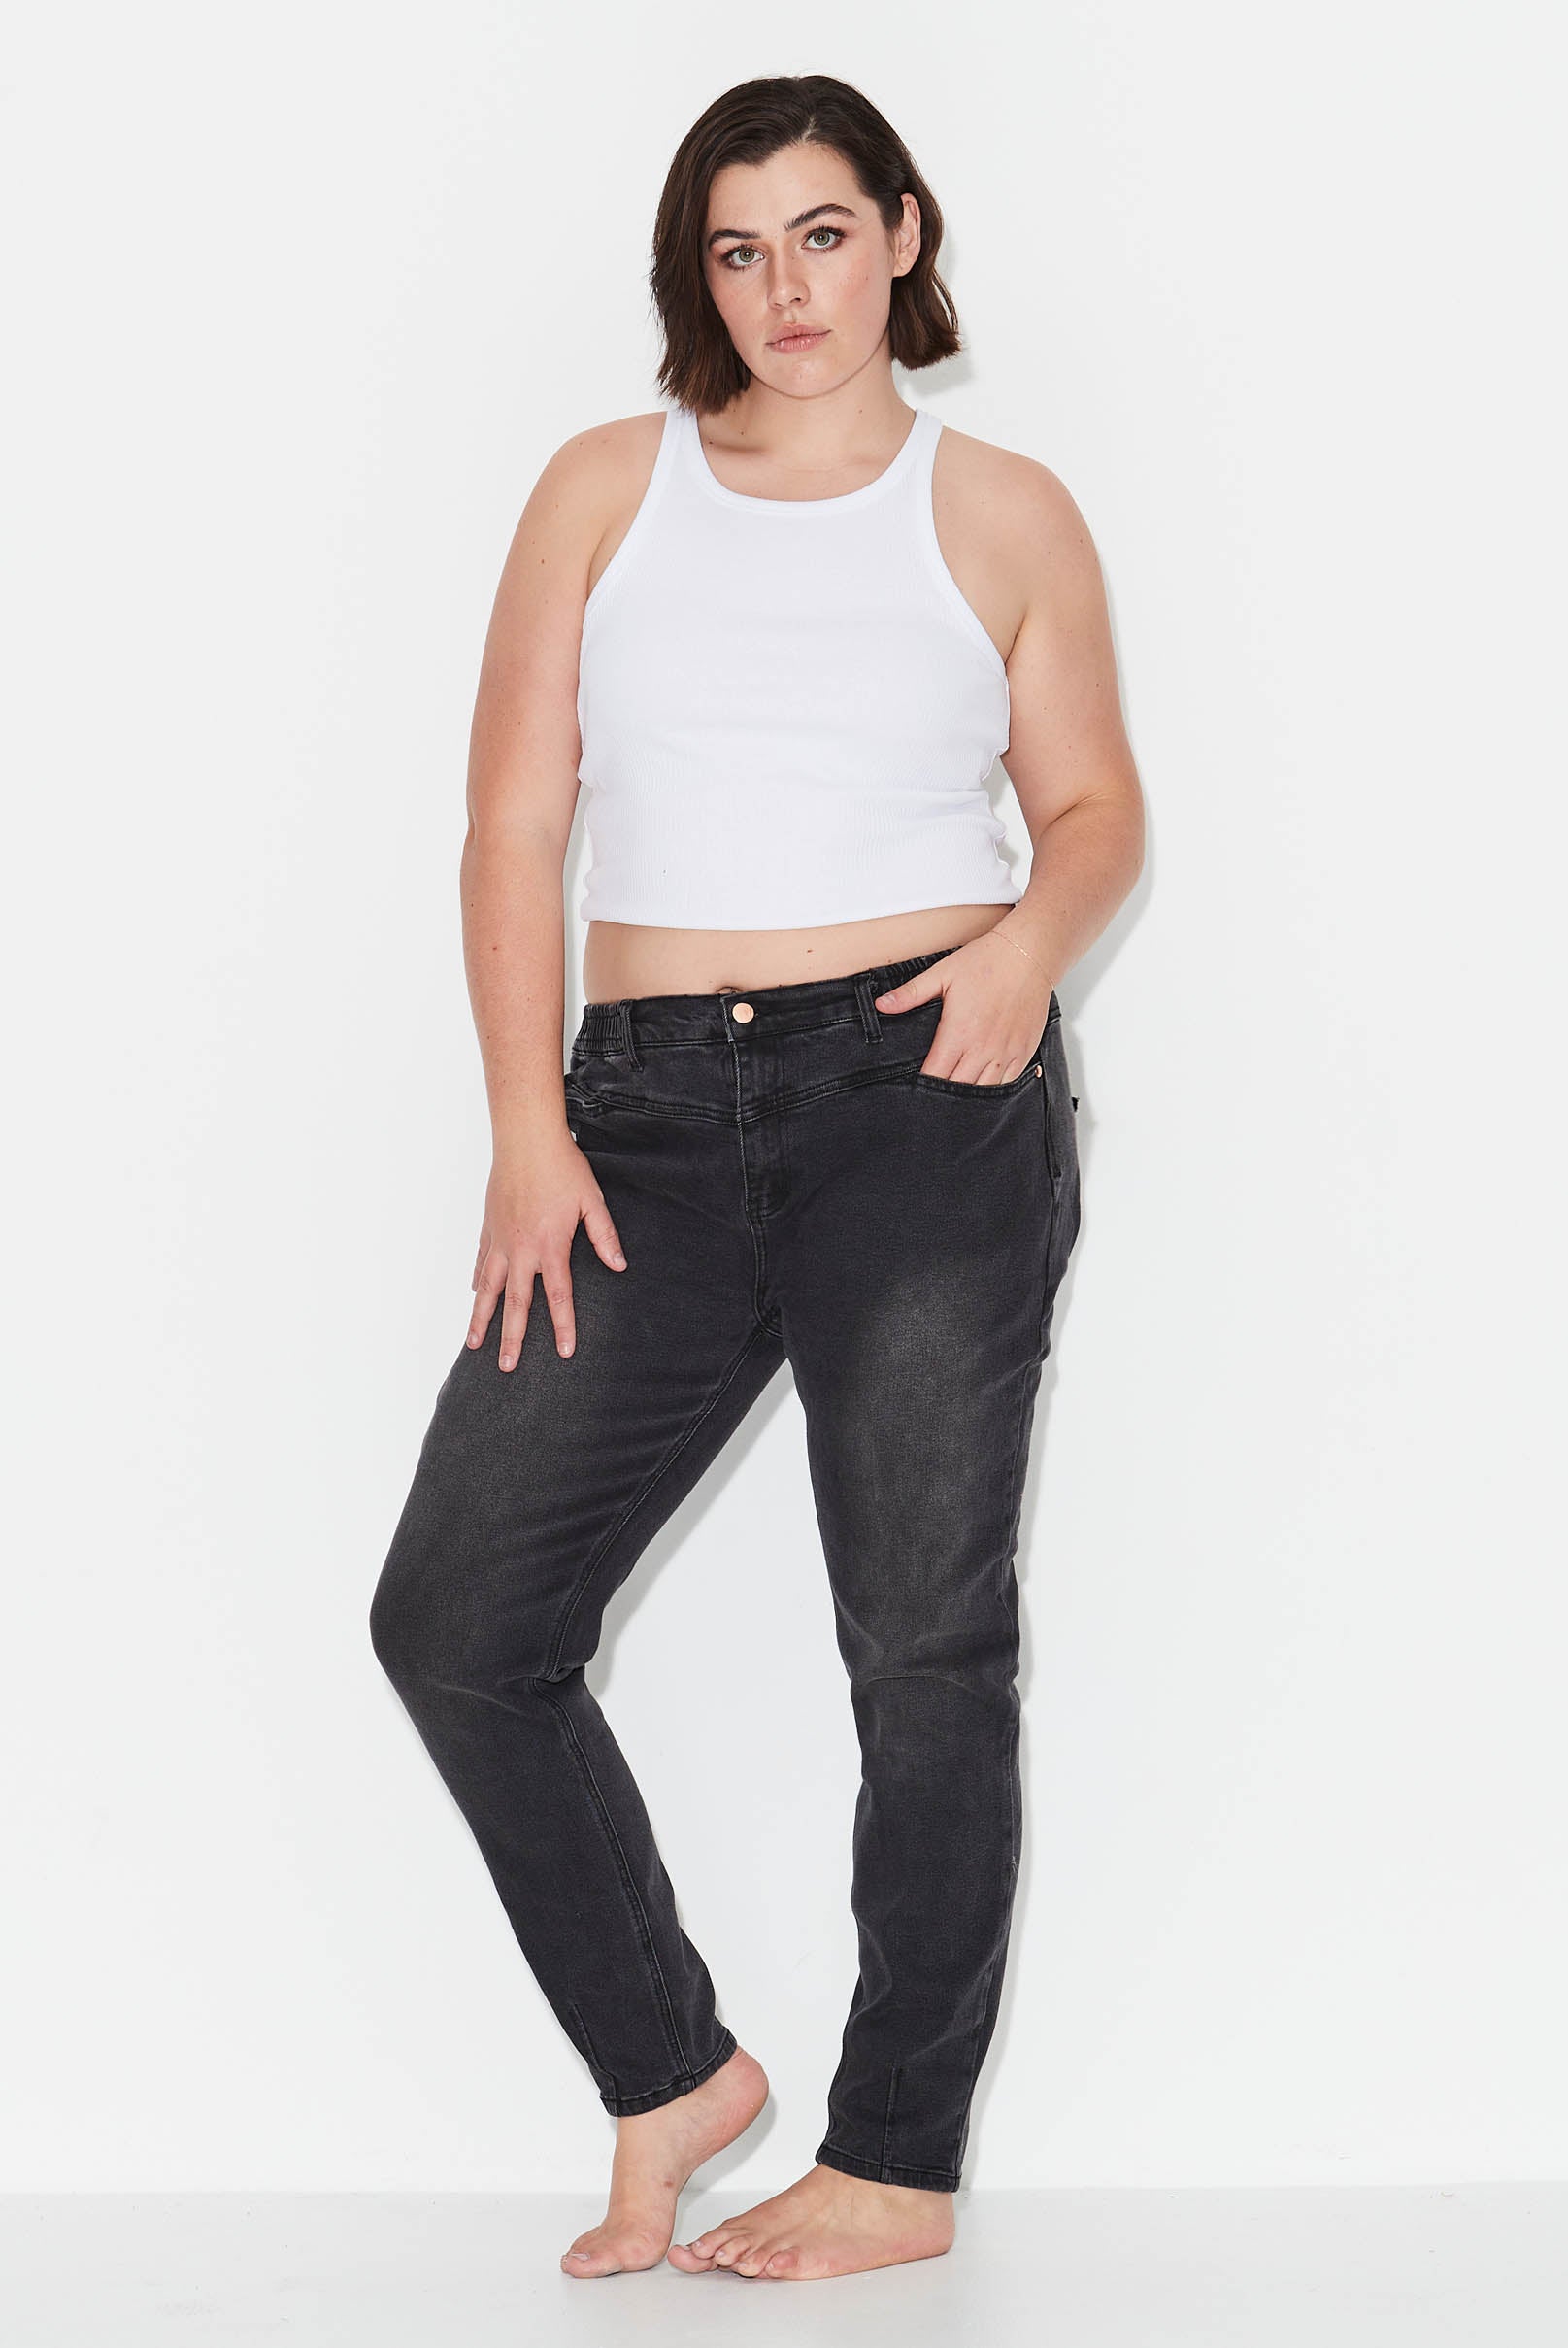 Model wears dark grey plus size jeans with tapered leg and yoke detail.